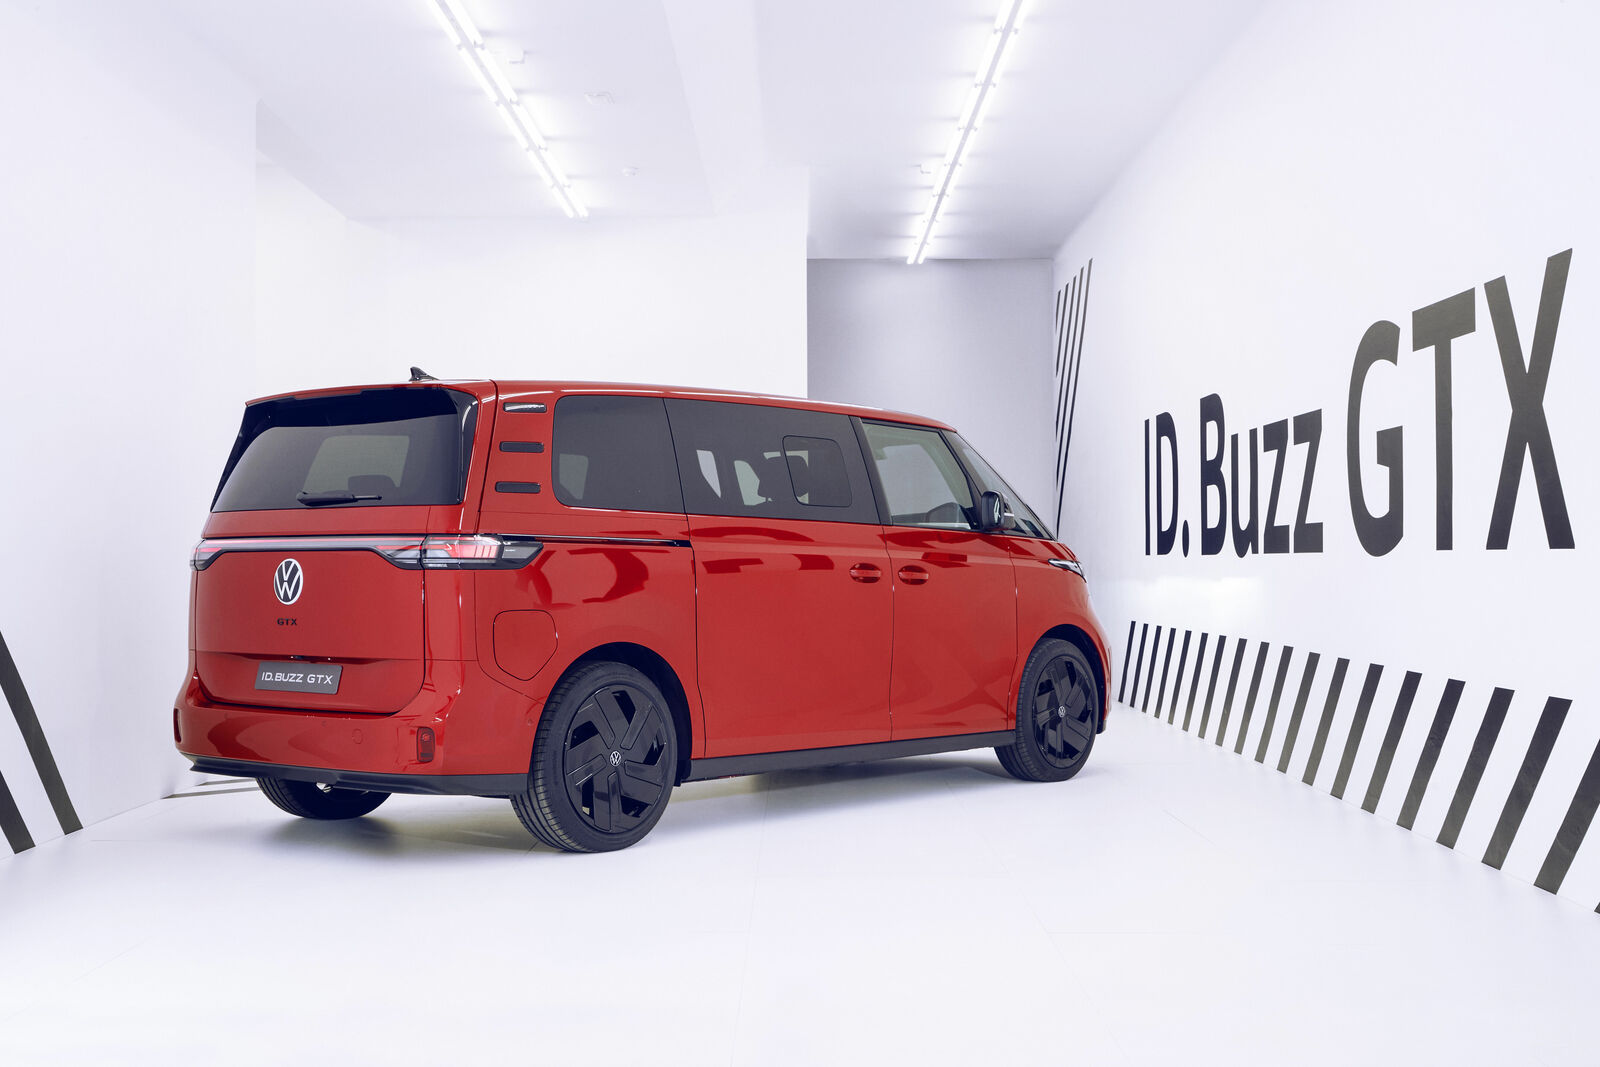 The all-electric Volkswagen ID. Buzz GTX